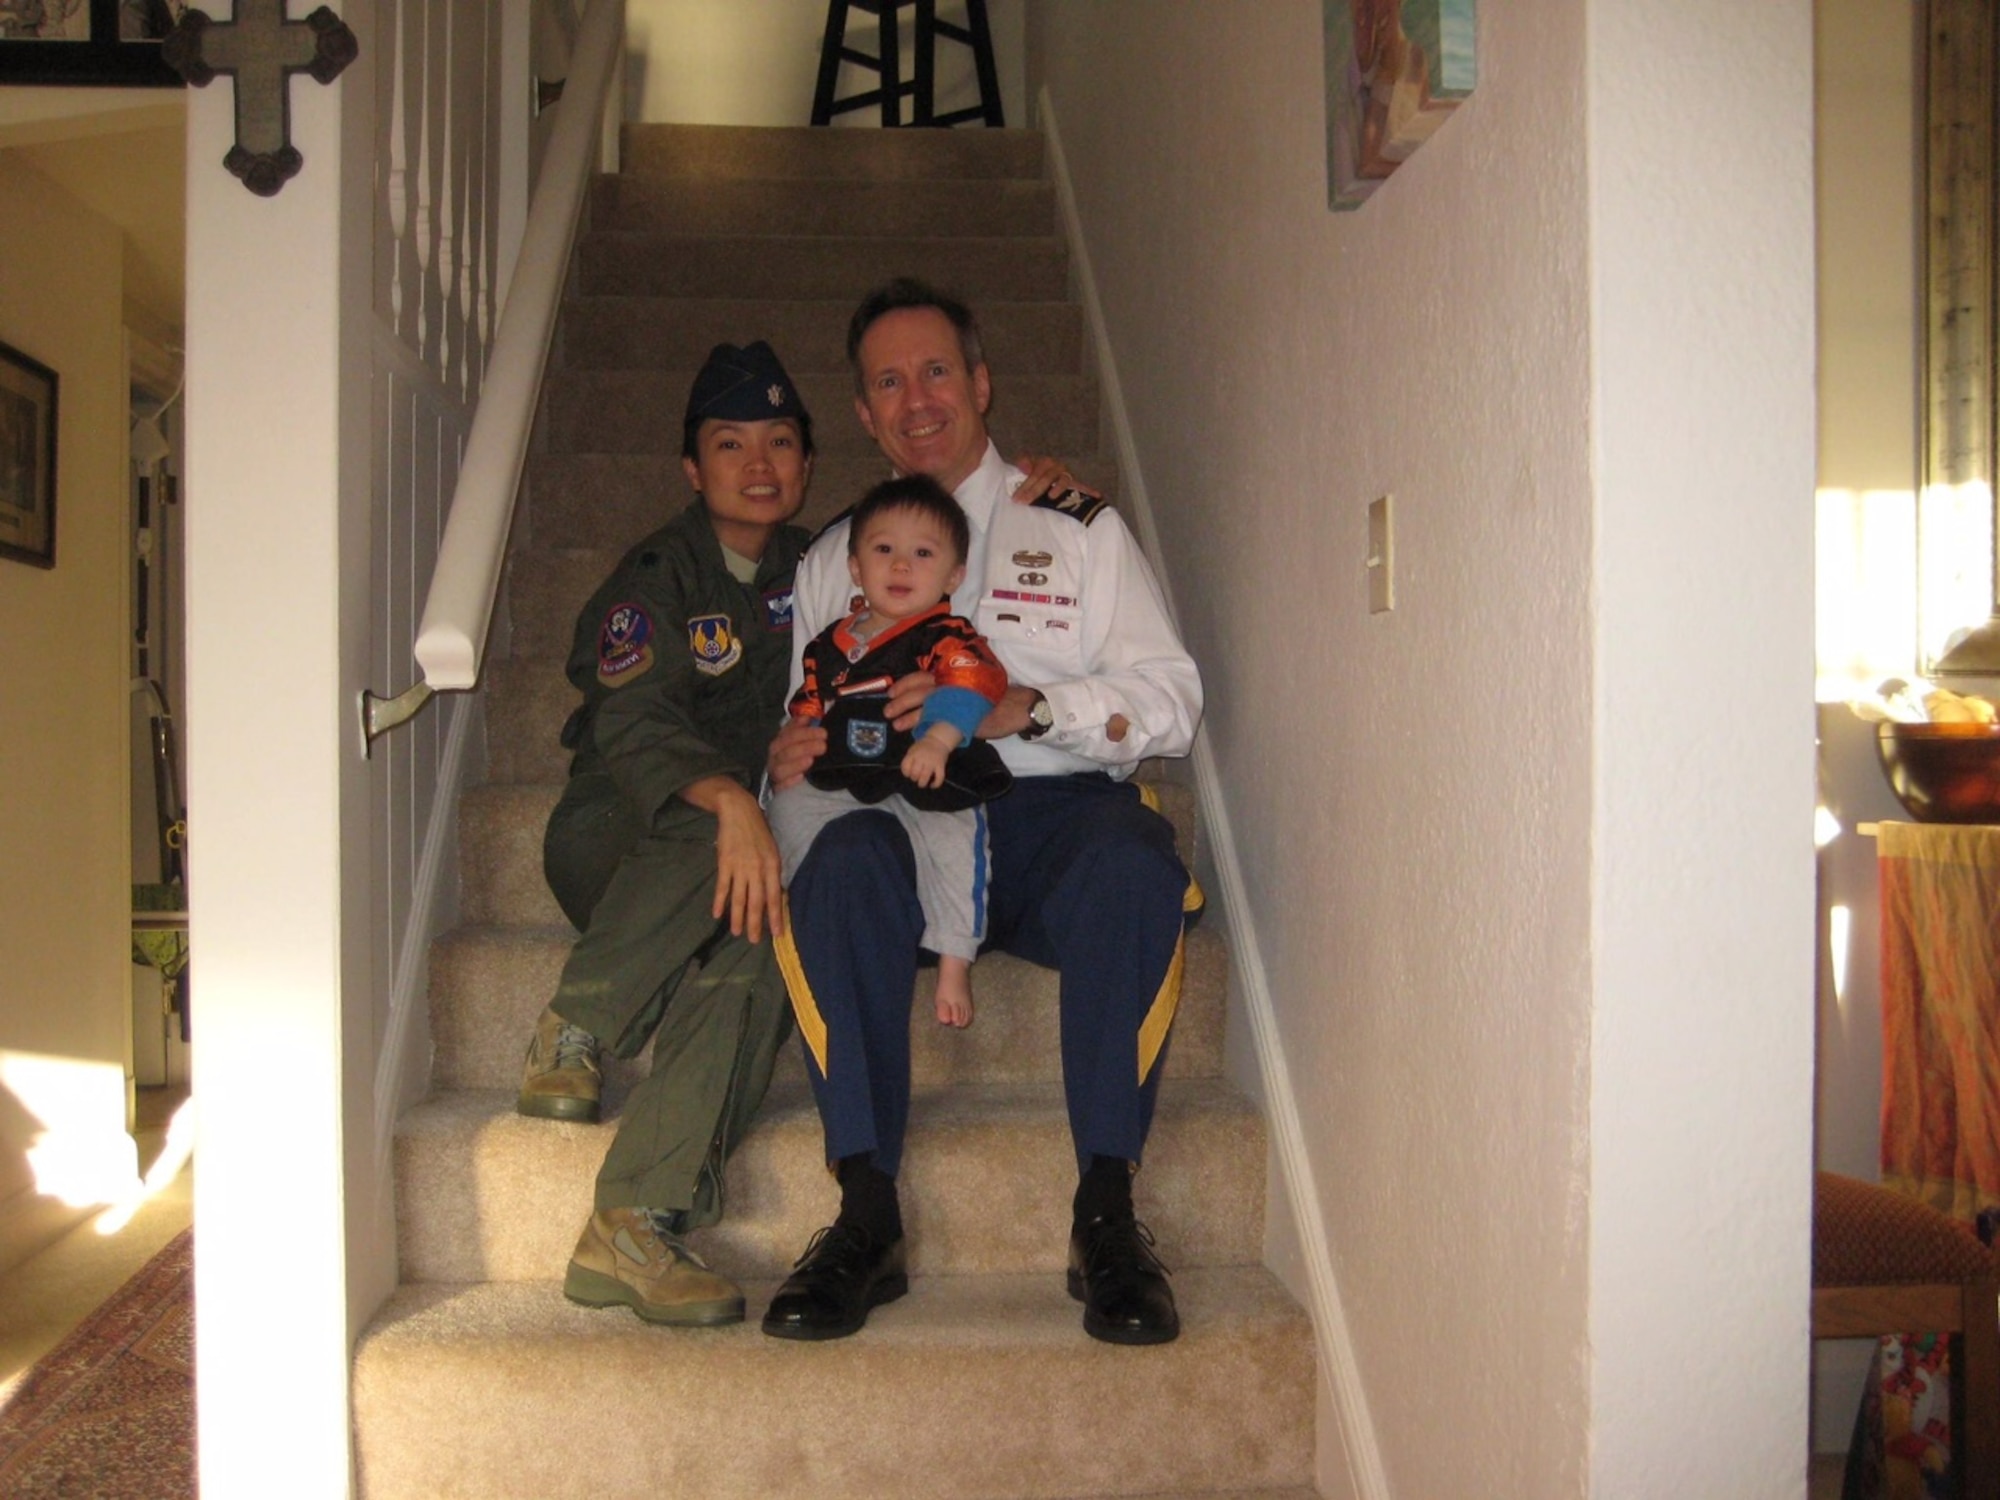 Lt. Col. An Duong, the 28th Medical Group chief of aerospace medicine, sits with her family in their home in Ohio in 2014. Duong was born in Vietnam, but moved to the United States and became a medical professional before commissioning into the Air Force. (Courtesy photo)